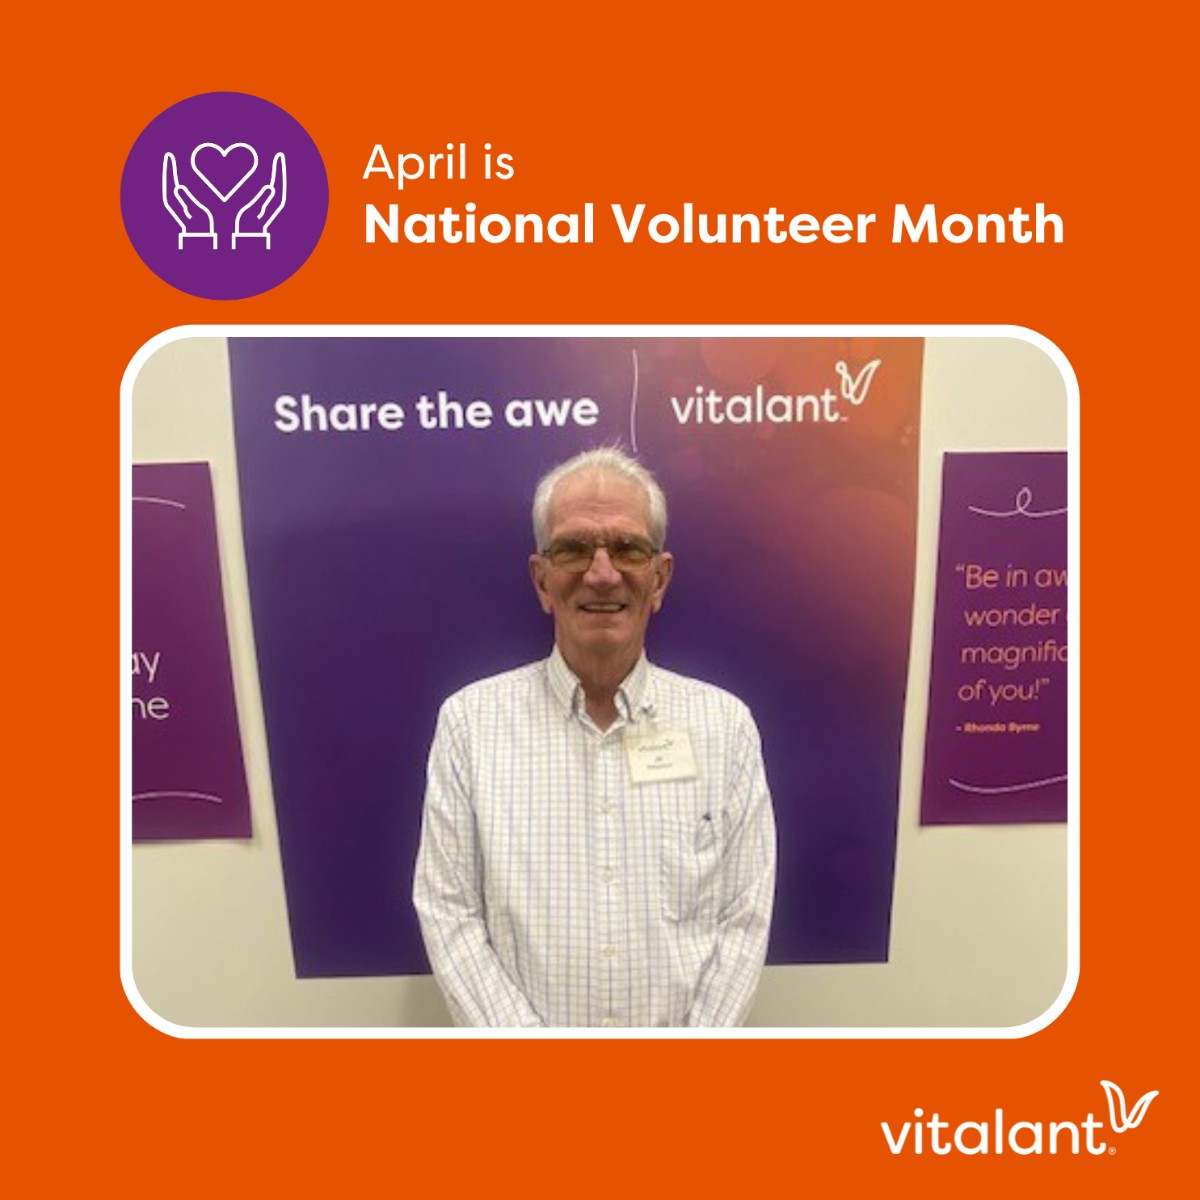 This #NationalVolunteerMonth, we're proud to celebrate amazing people like JR Richards who volunteered 6,000+ hours with Vitalant. 

As a volunteer, your actions save lives by helping patients get the blood they need. Find opportunities near you: brnw.ch/21wIEQa